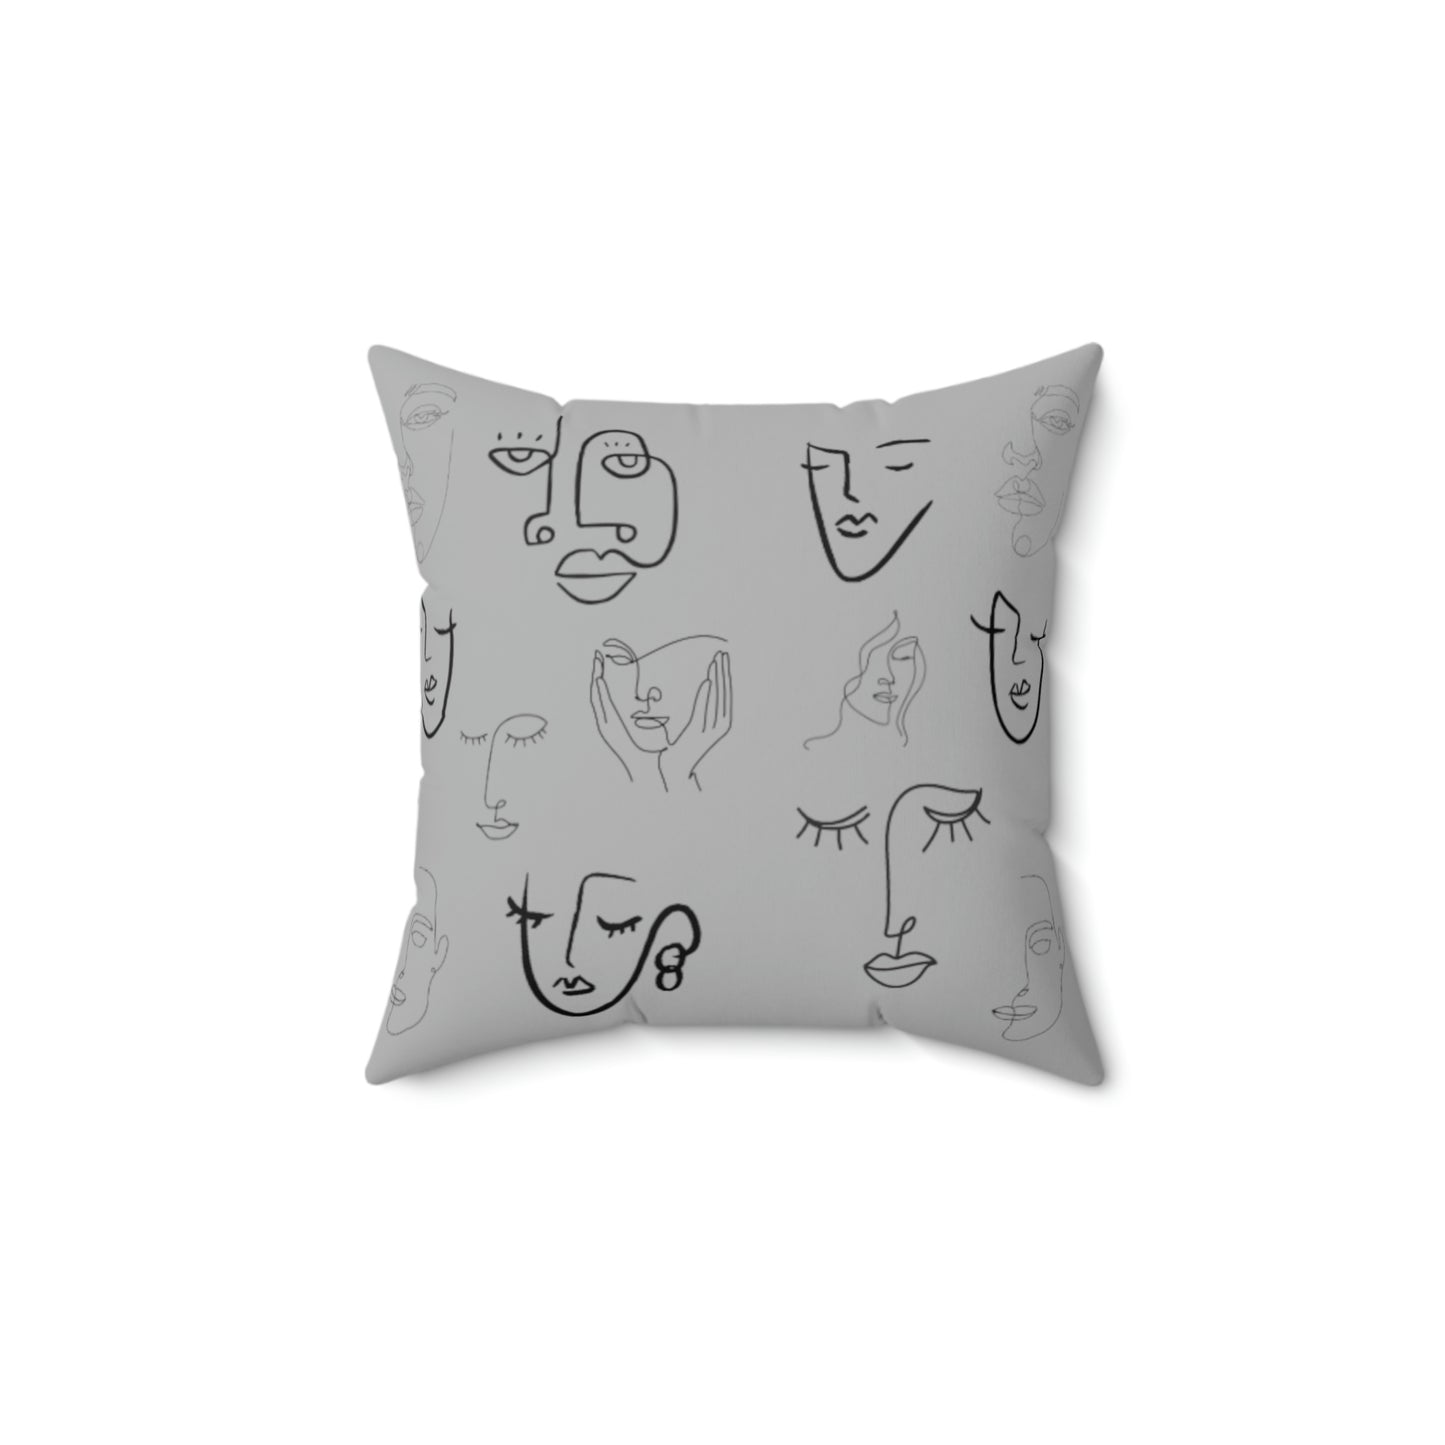 Many Faces grey - Spun Polyester Square Pillow